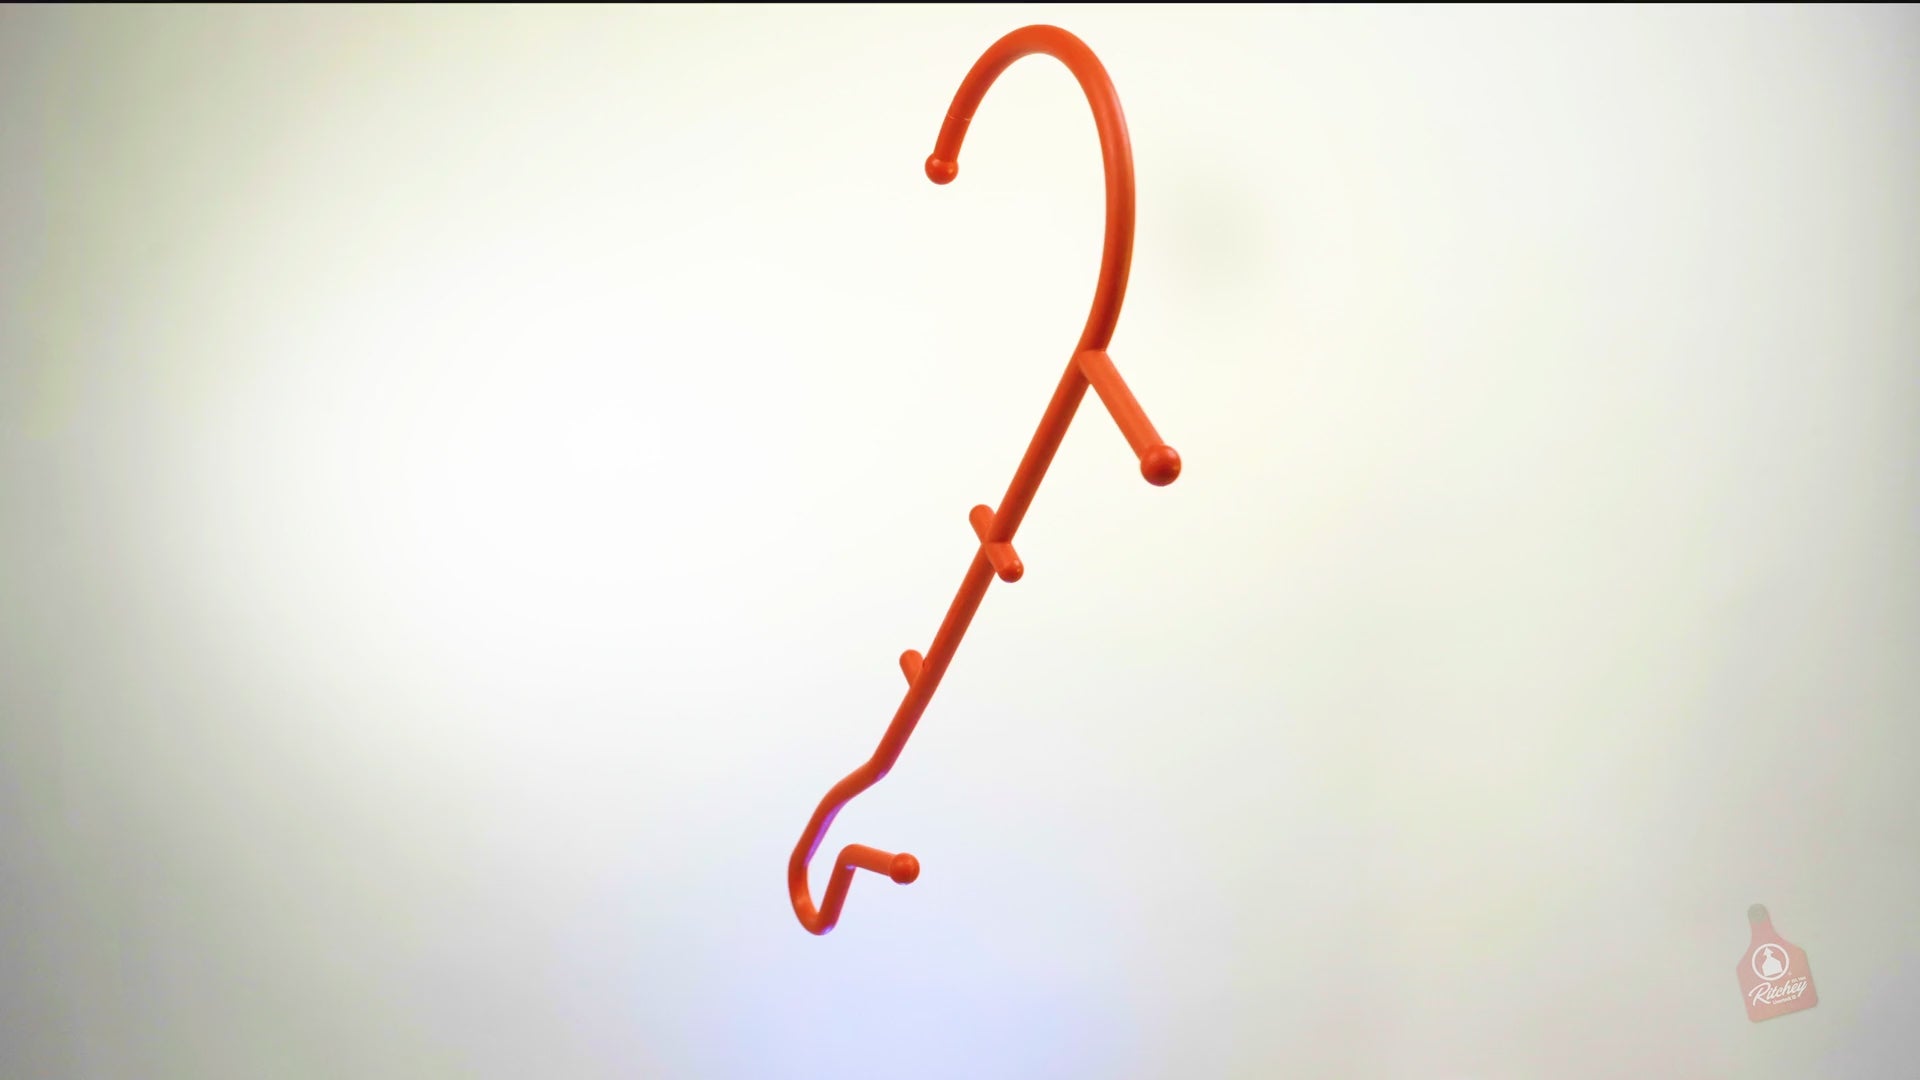 Red rounded livestock hook. The large hook will assist in safely and humanely controlling an animal's head by hooking the cheek. The small hook is ideal for safely and humanely catching calves less than 125 pounds by the leg.